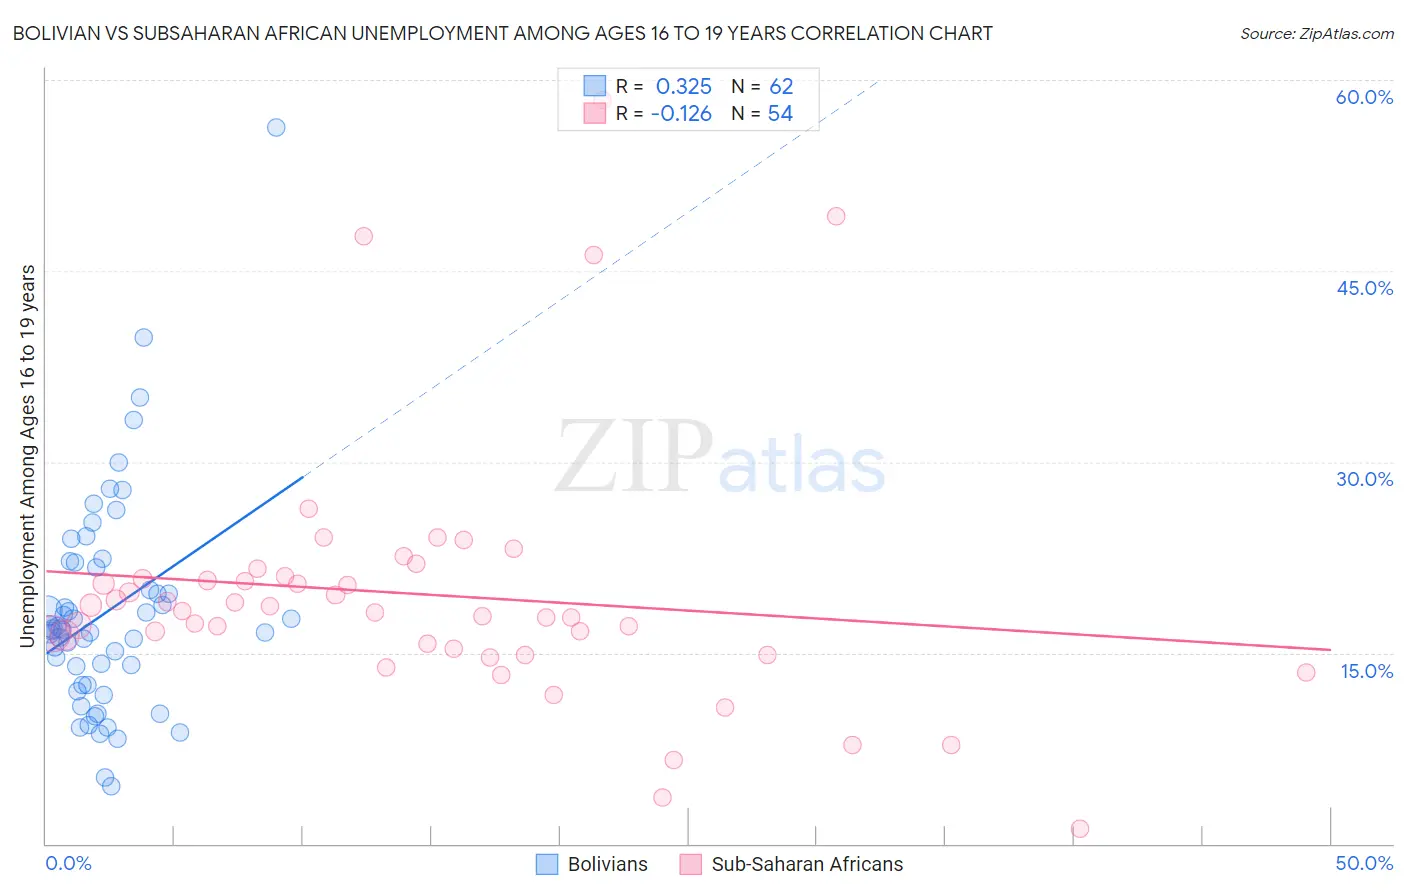 Bolivian vs Subsaharan African Unemployment Among Ages 16 to 19 years